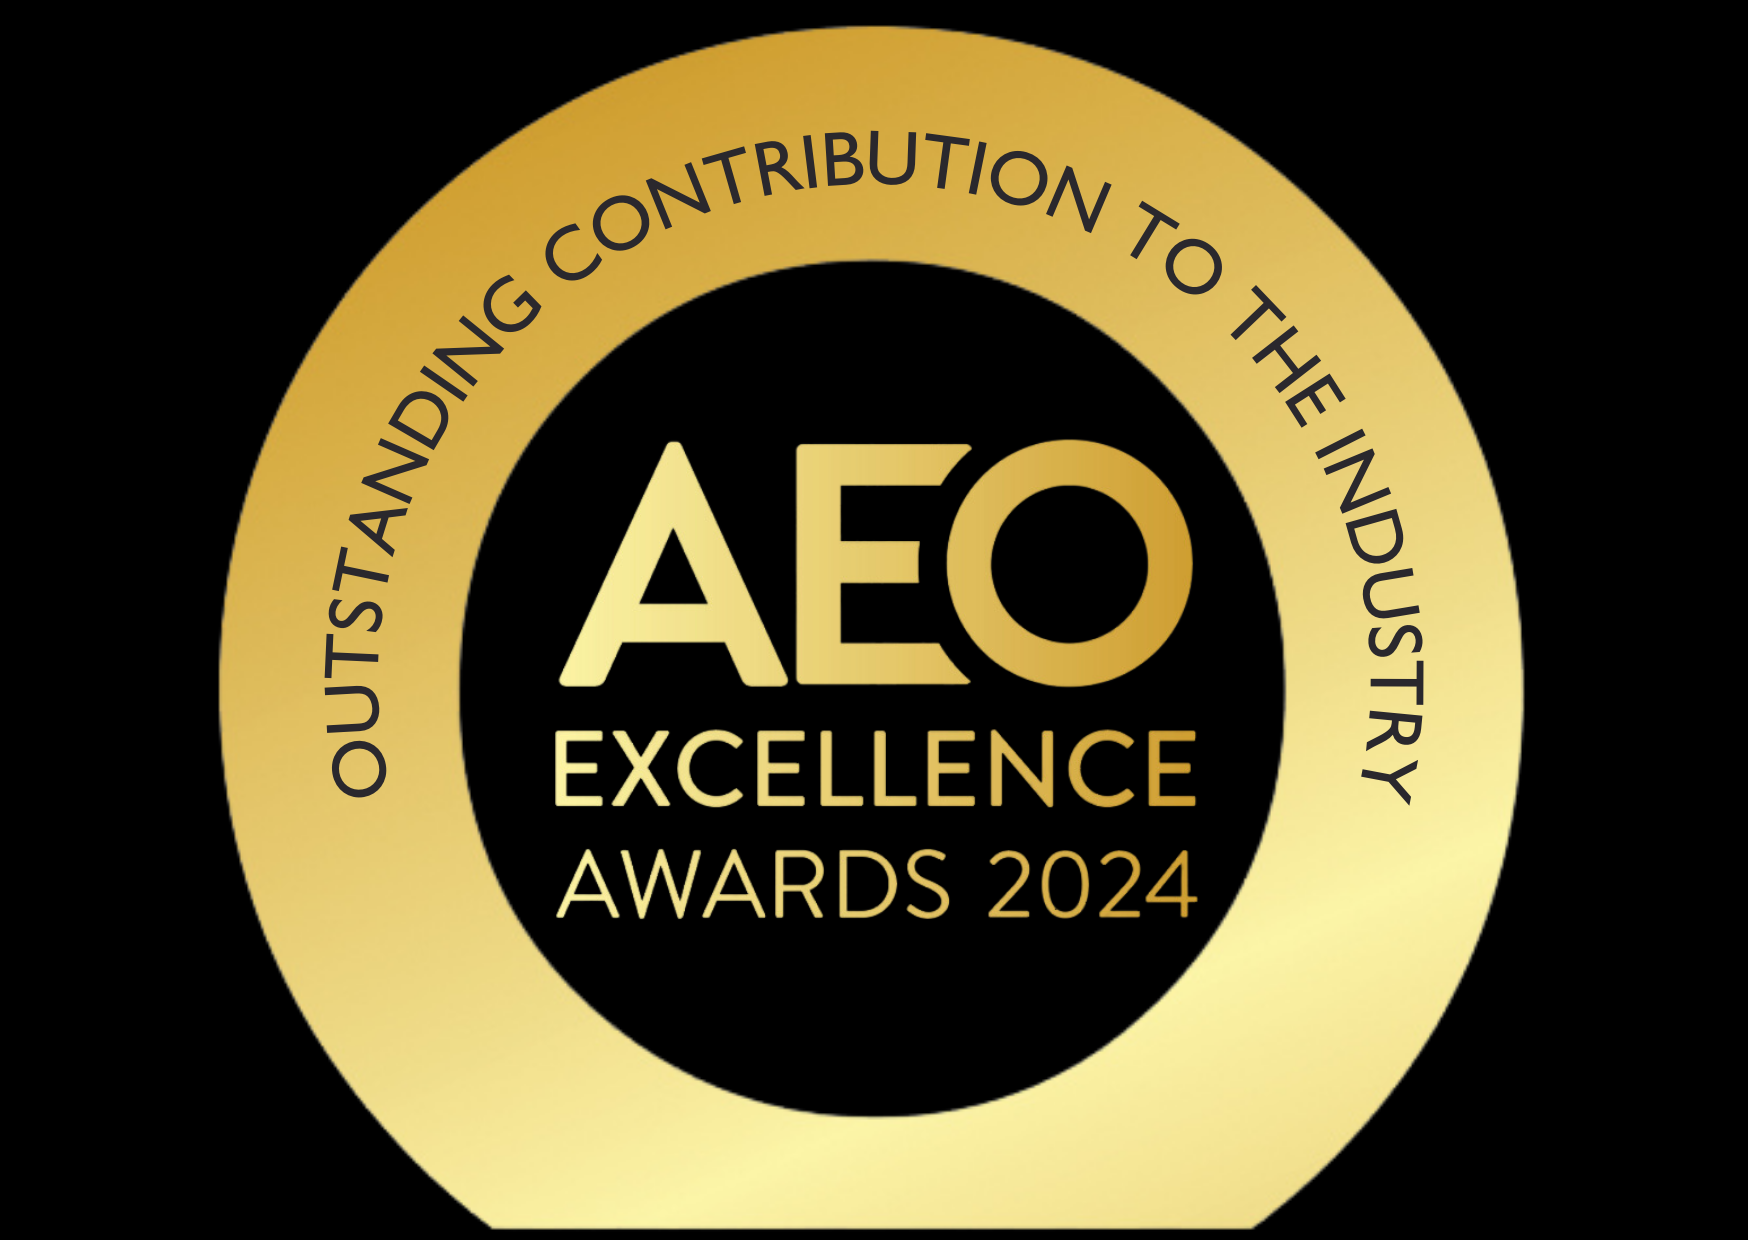 OUTSTANDING CONTRIBUTION TO THE INDUSTRY AWARD